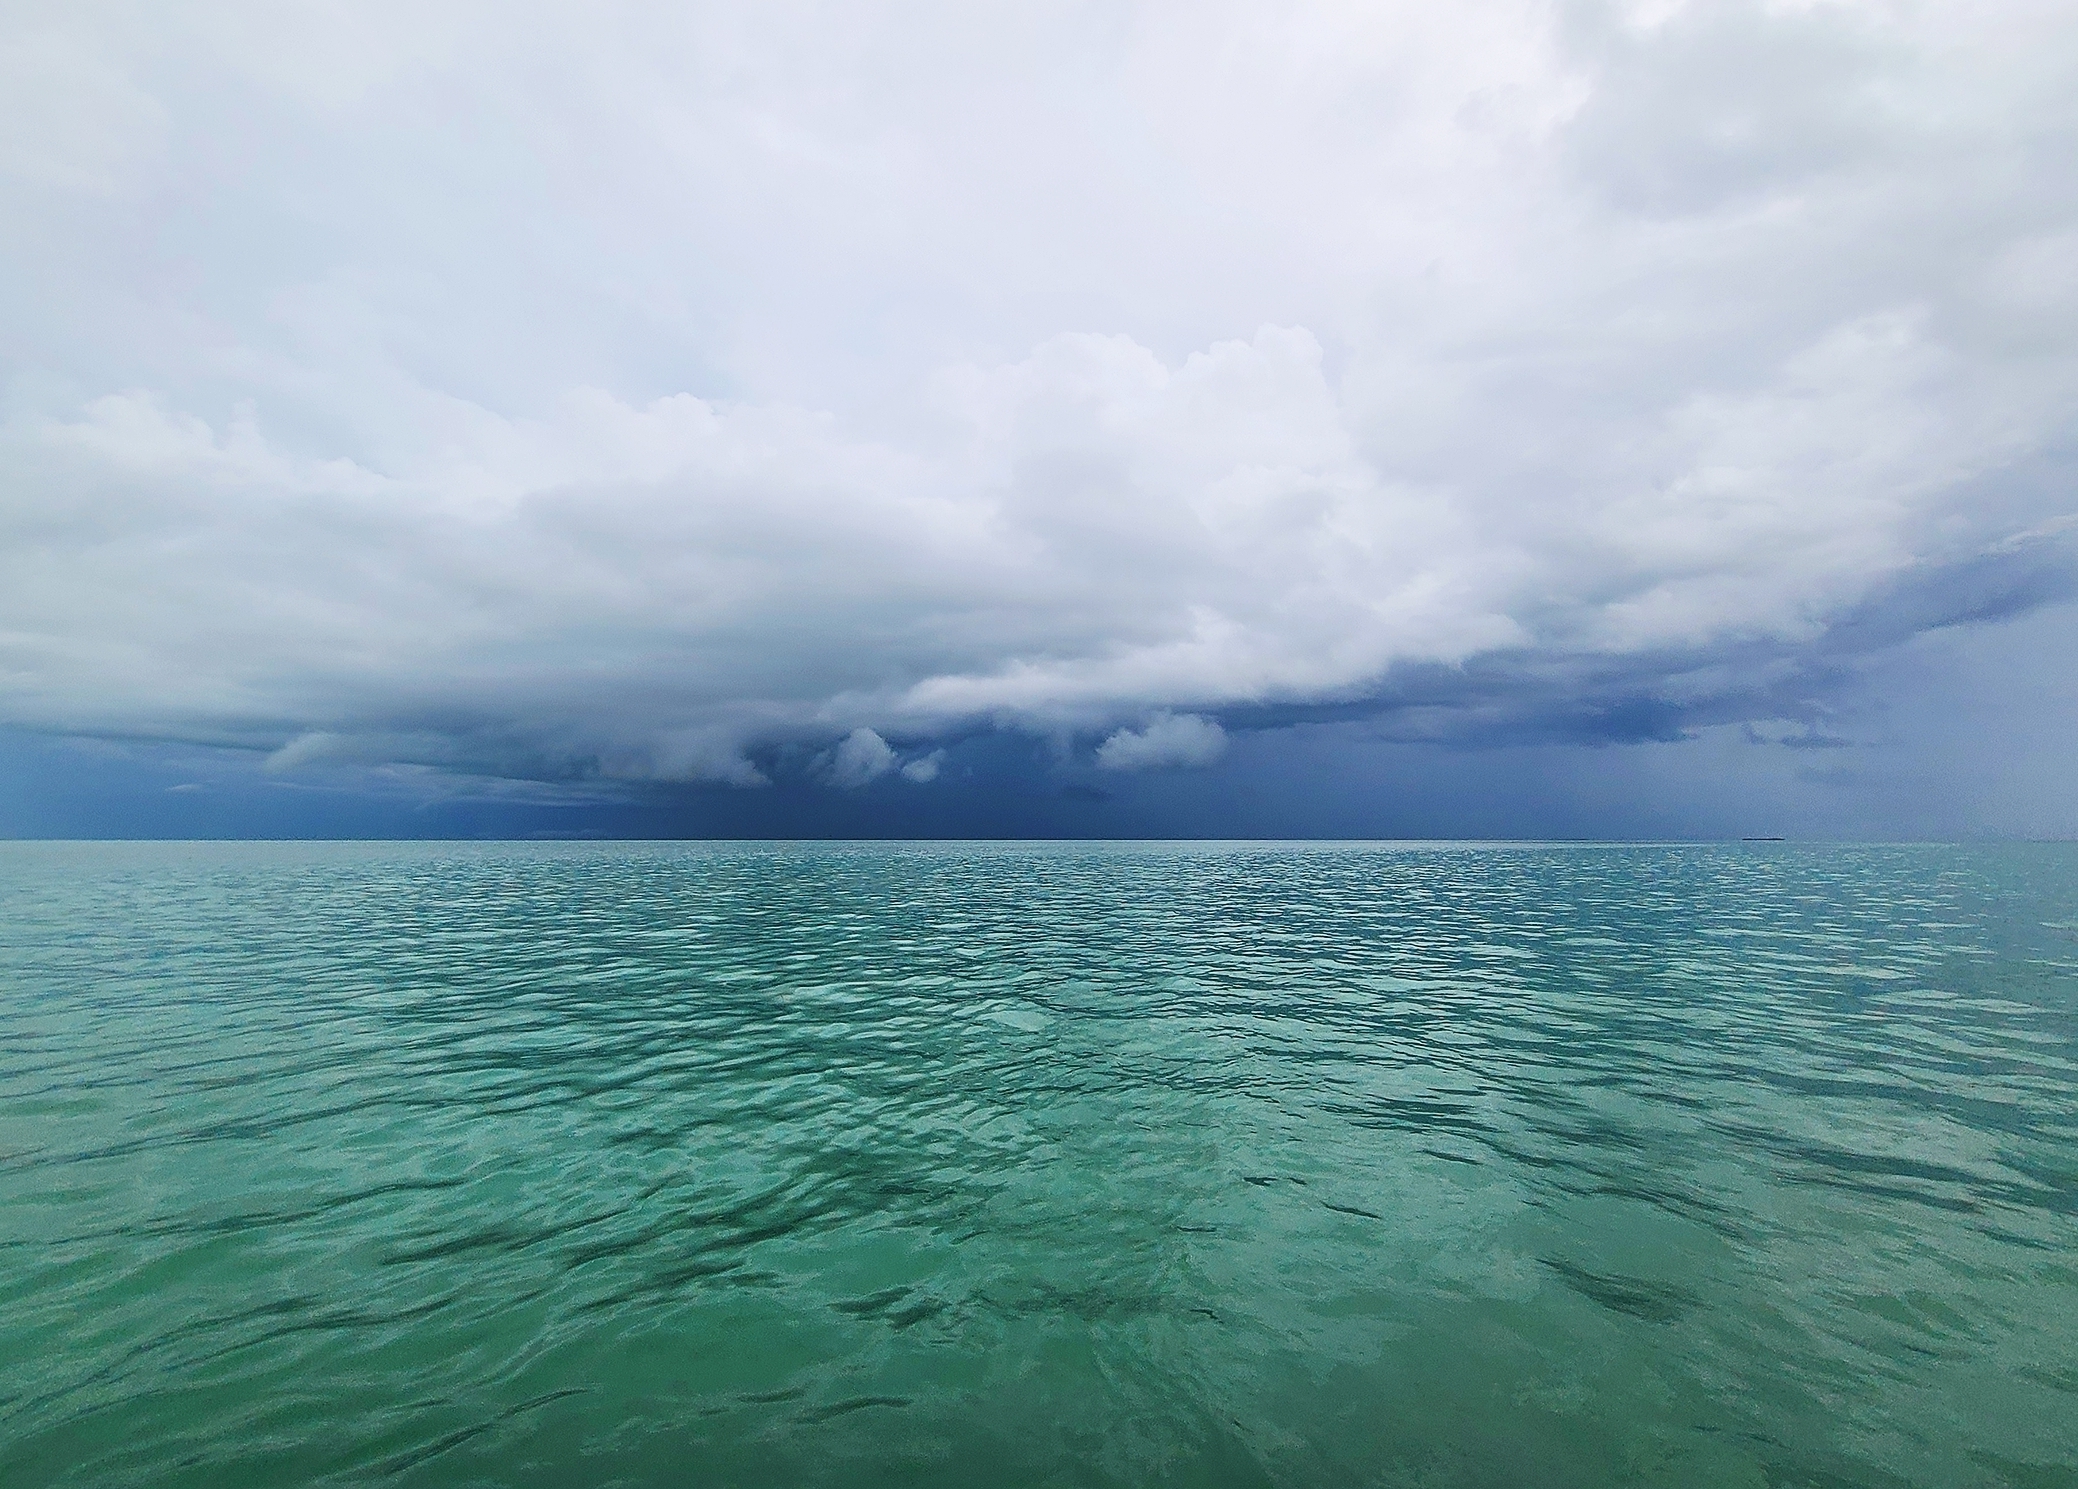 Chart of latest statistics from the Florida Keys Real Estate Market as of May 1, Photo of storm over the ocean